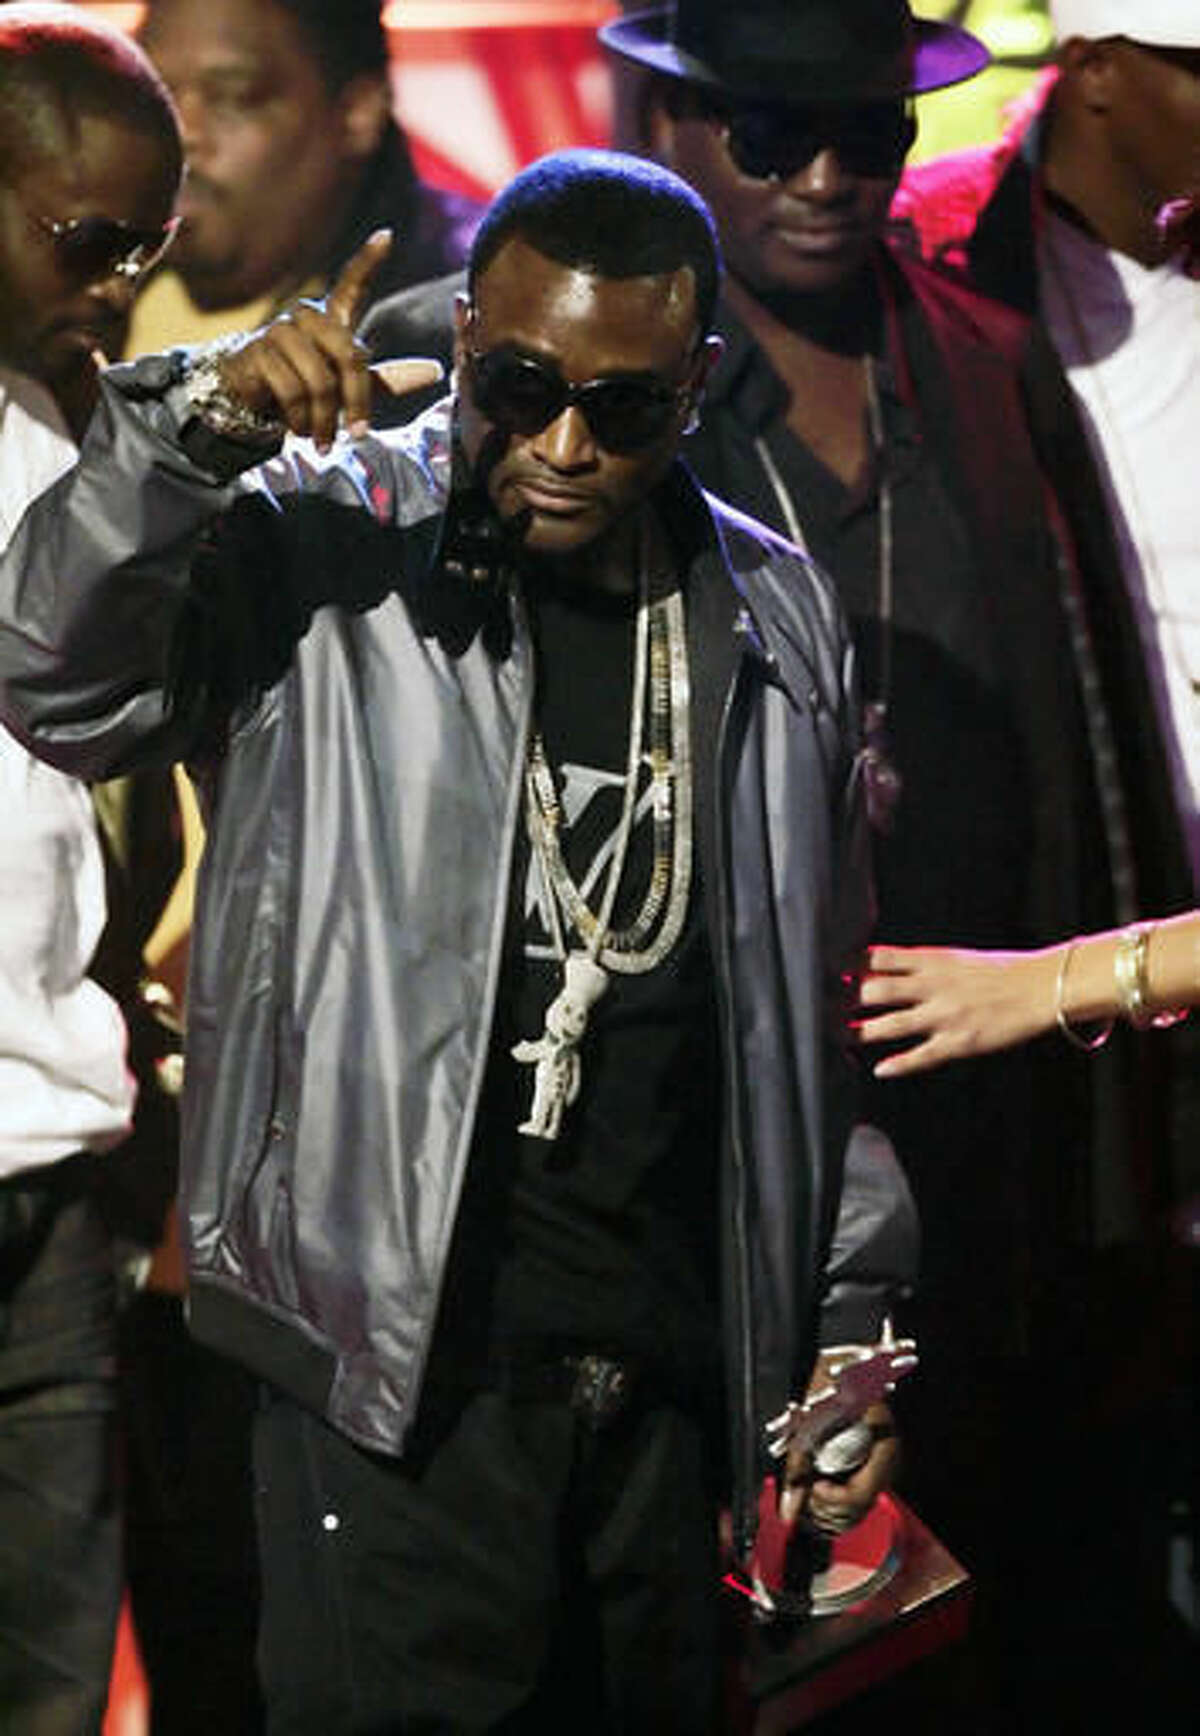 In this Oct. 18, 2008 file photo, Shawty Lo accepts the Rookie of the Year award during the BET Hip Hop Awards in Atlanta. Authorities say rapper Shawty Lo, whose real name is Carlos Walker, has been killed in a fiery car crash before dawn Wednesday, Sept. 21, 2016 on a freeway near southwest Atlanta. (AP Photo/John Amis, File)